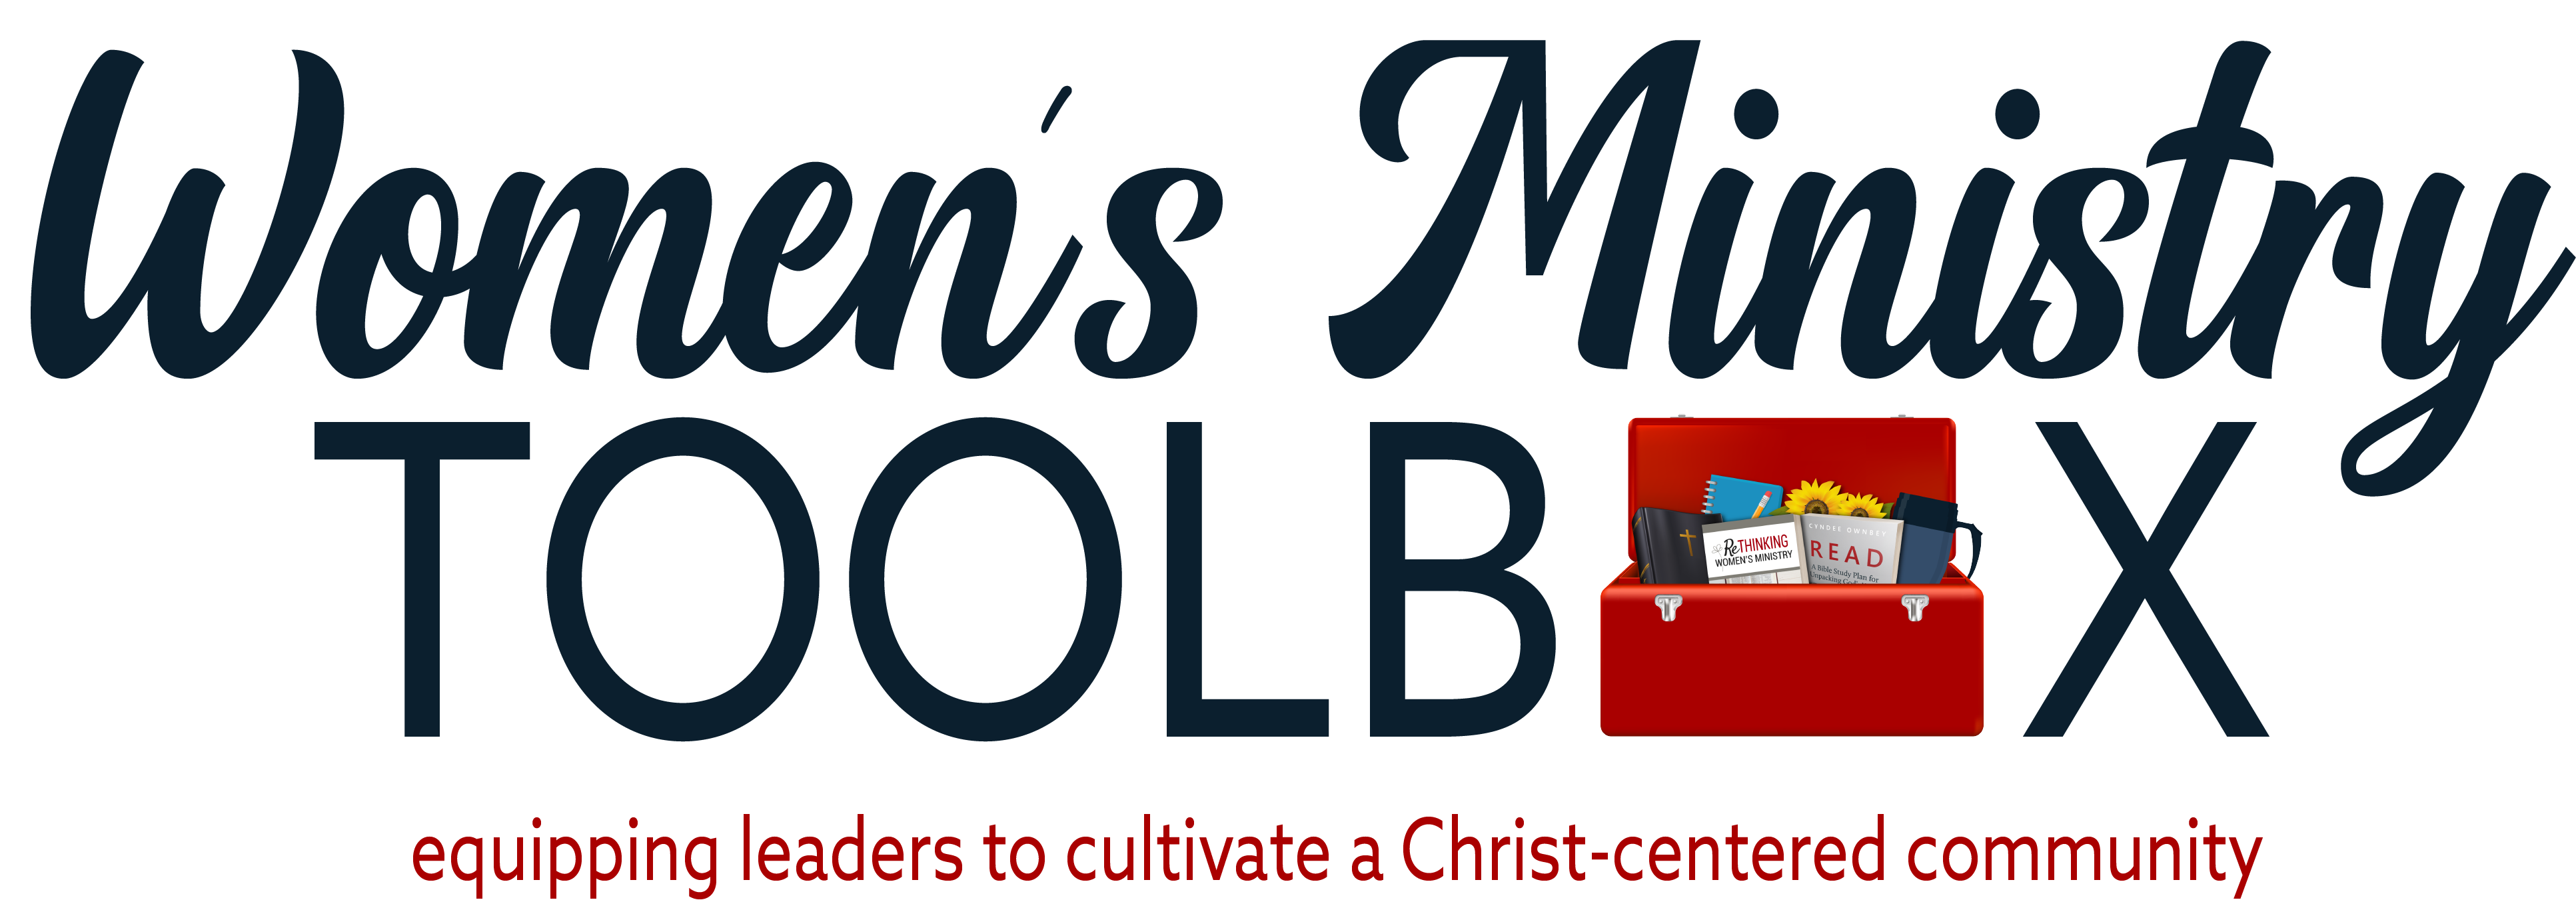 Women's Ministry Toolbox